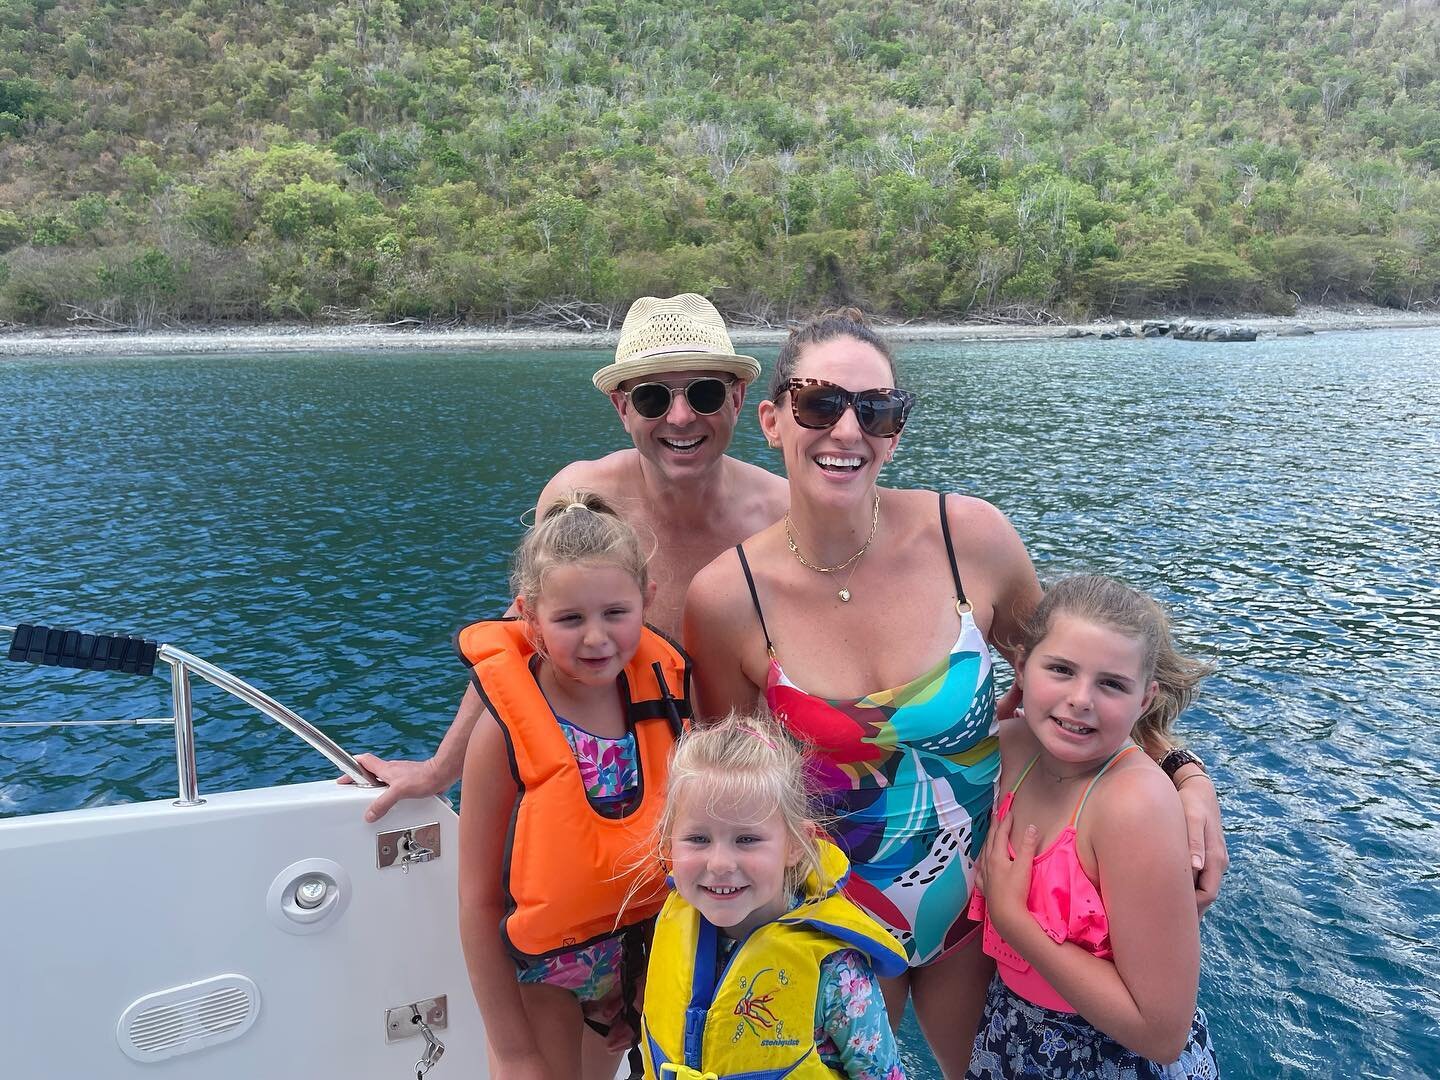 And that&rsquo;s a wrap! 🙌Final charter of the season &amp; it was an AWESOME one! ⛵️⛵️🙏🙏🙏 We had a blast with this adorable family from Kansas!👍Tomorrow we set sail for Saint Kitts! ⛵️⛵️🏝🏝🙌 

#ciaobellacharters #sailingcaribbean #privatechar